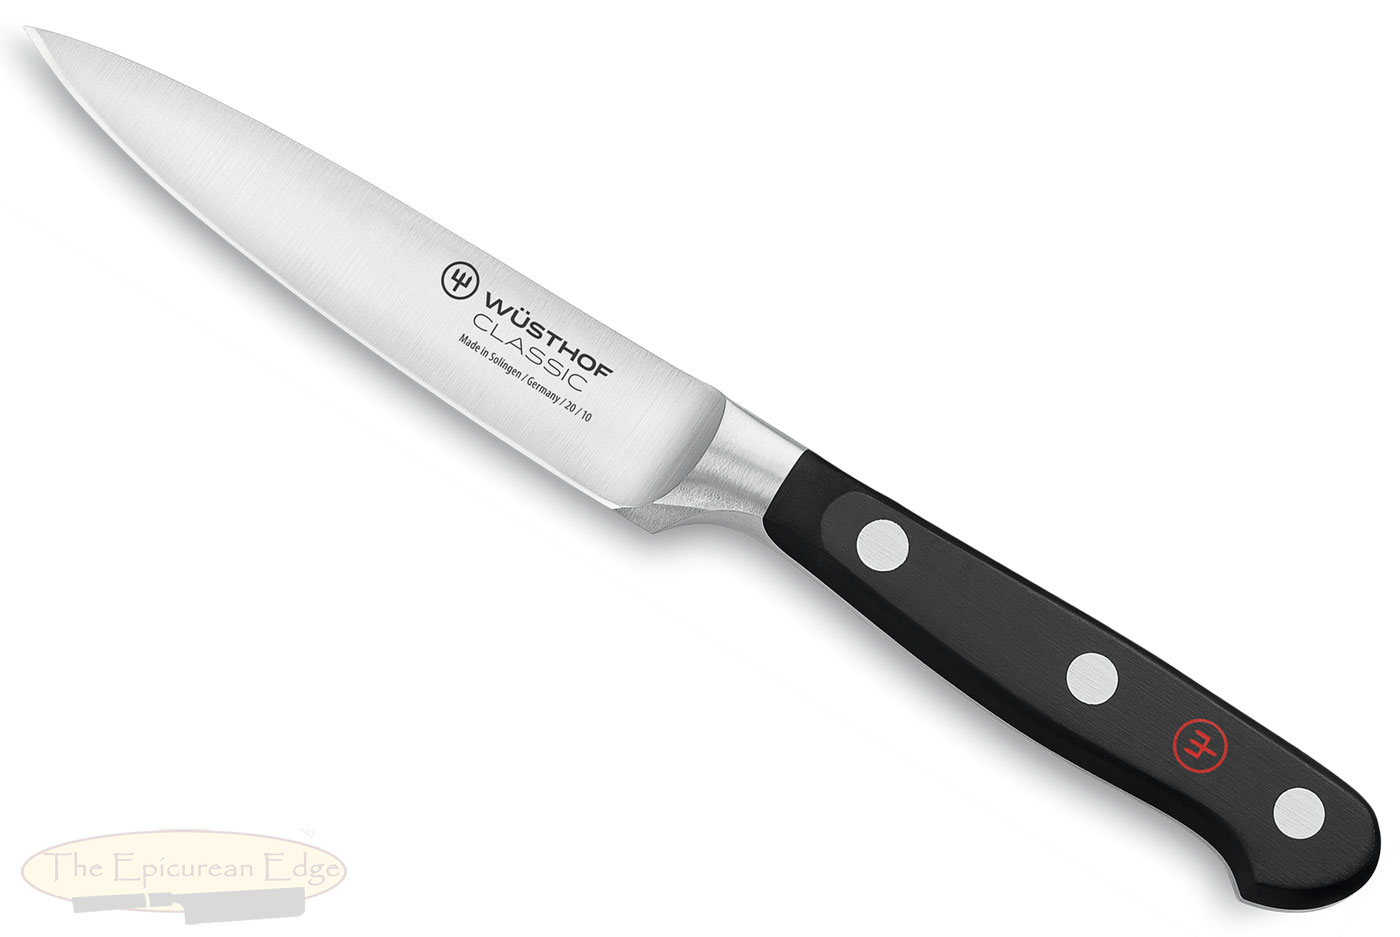 Wusthof-Trident Classic Paring Knife - 4 in. (1040100410)